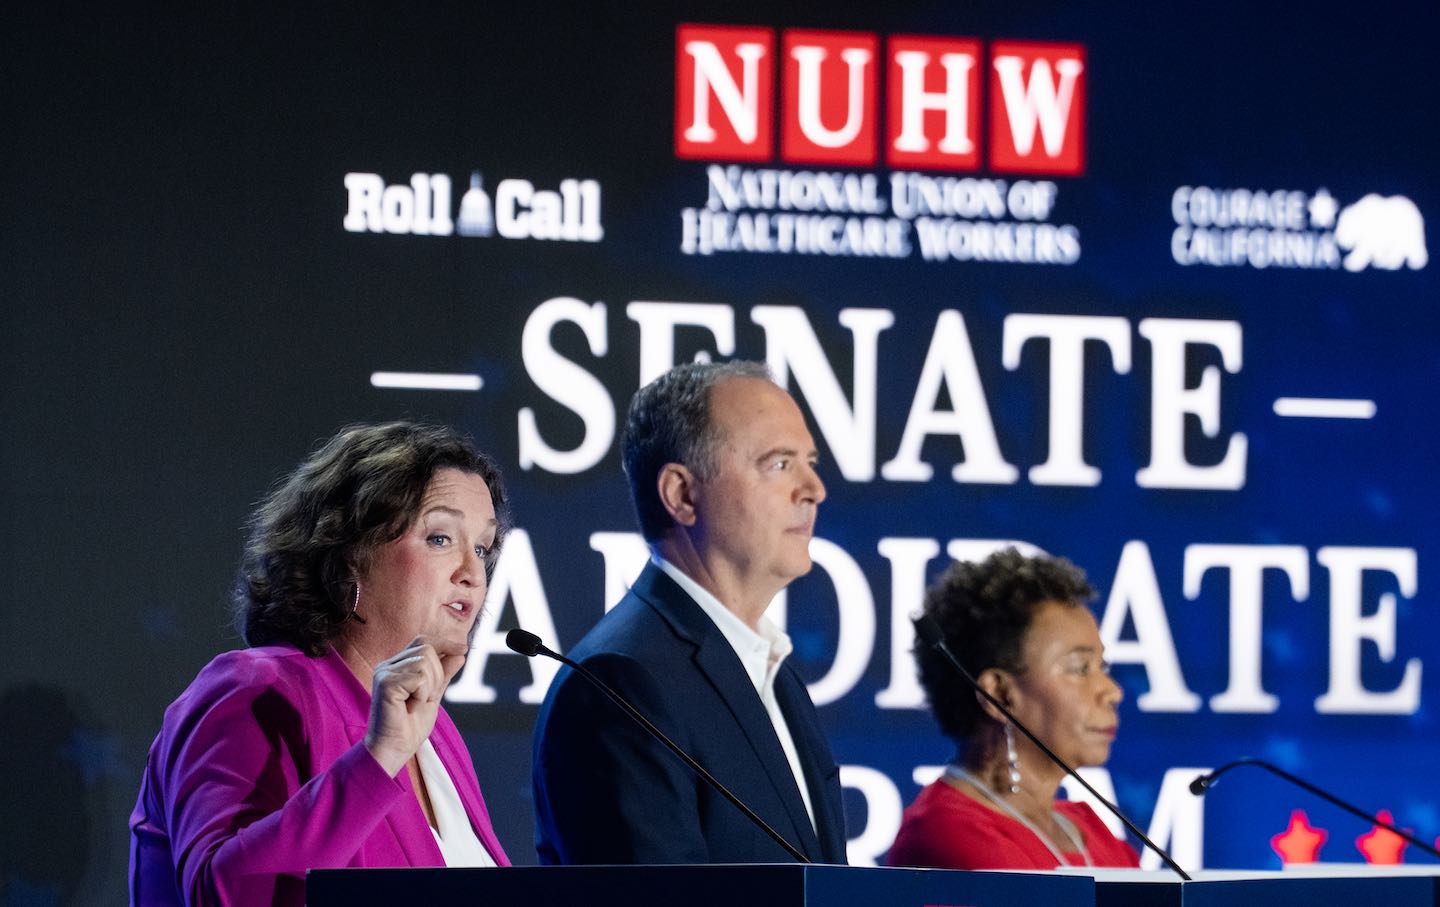 From left, US Representatives for California Katie Porter, Adam Schiff, and Barbara Lee, Democratic candidates for the California Senate, participate in the National Union of Healthcare Workers Senate Candidate Forum in downtown Los Angeles on Sunday, October 8, 2023.